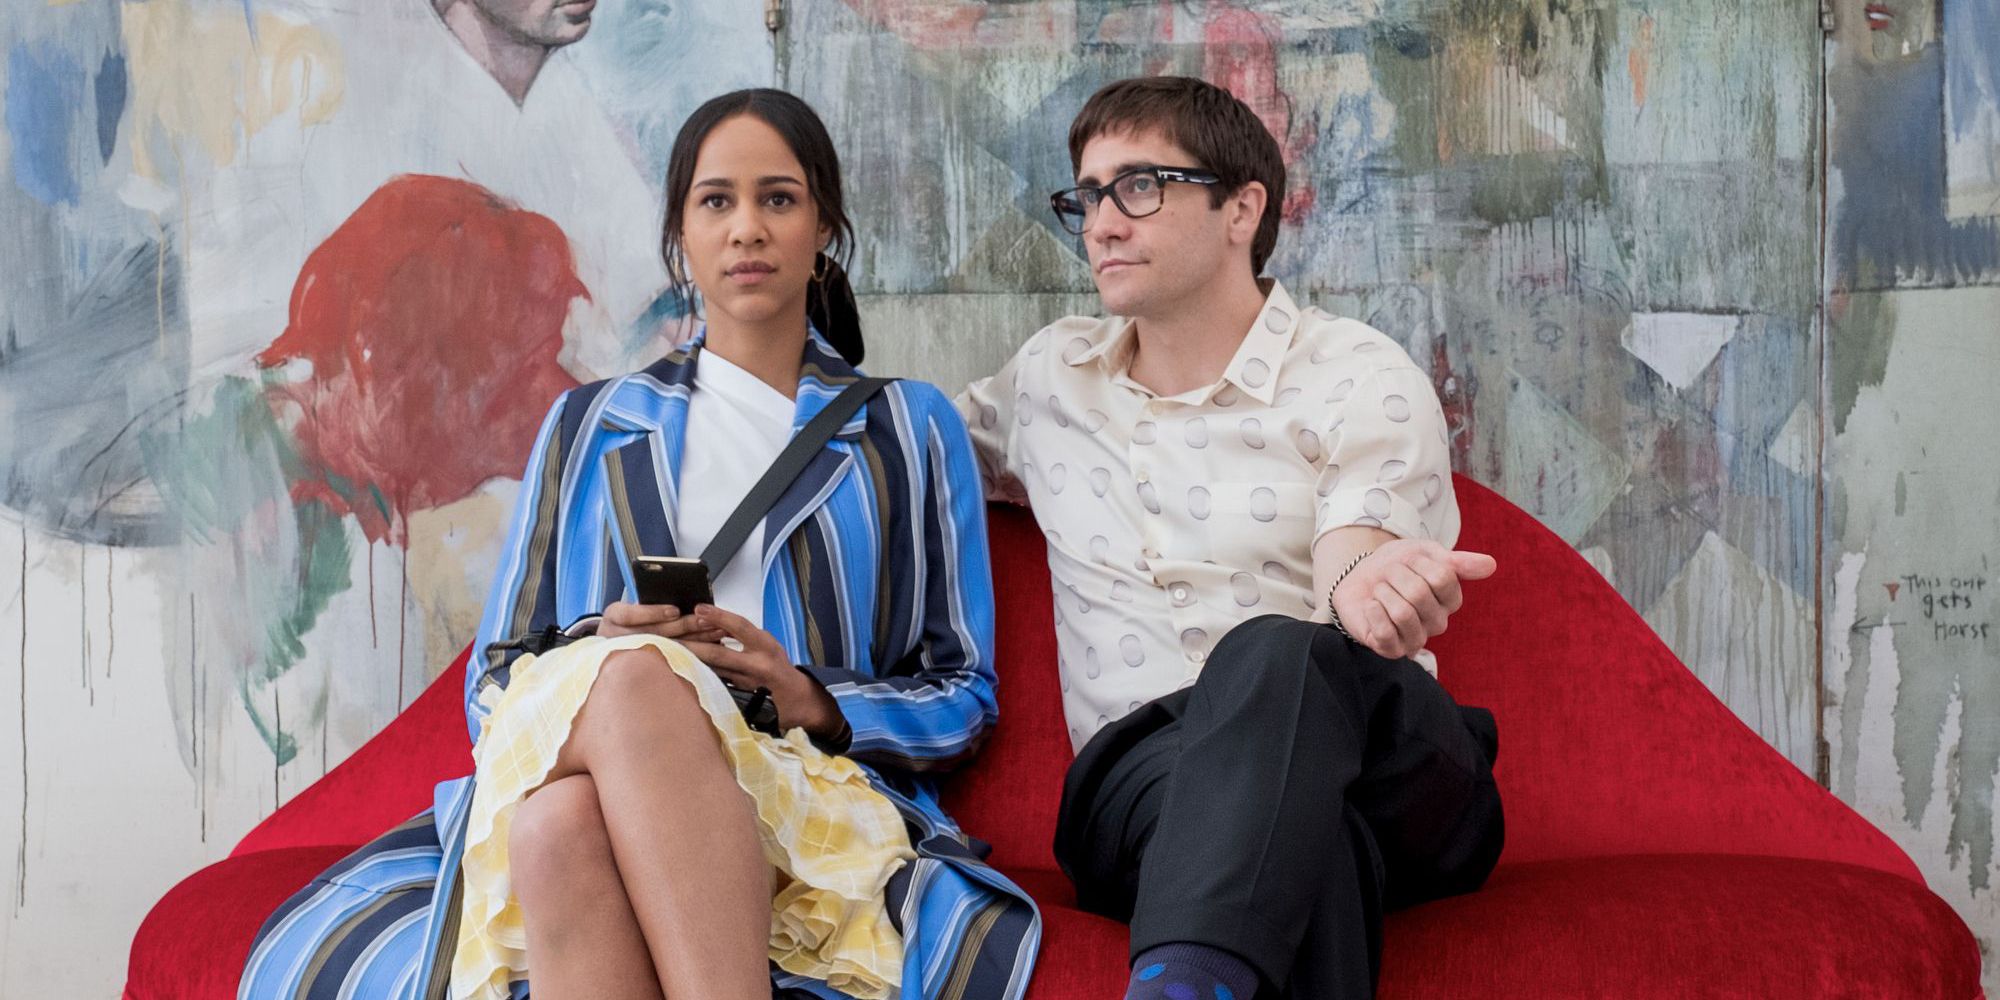 10 Movies More Messed Up Than Netflixs Velvet Buzzsaw